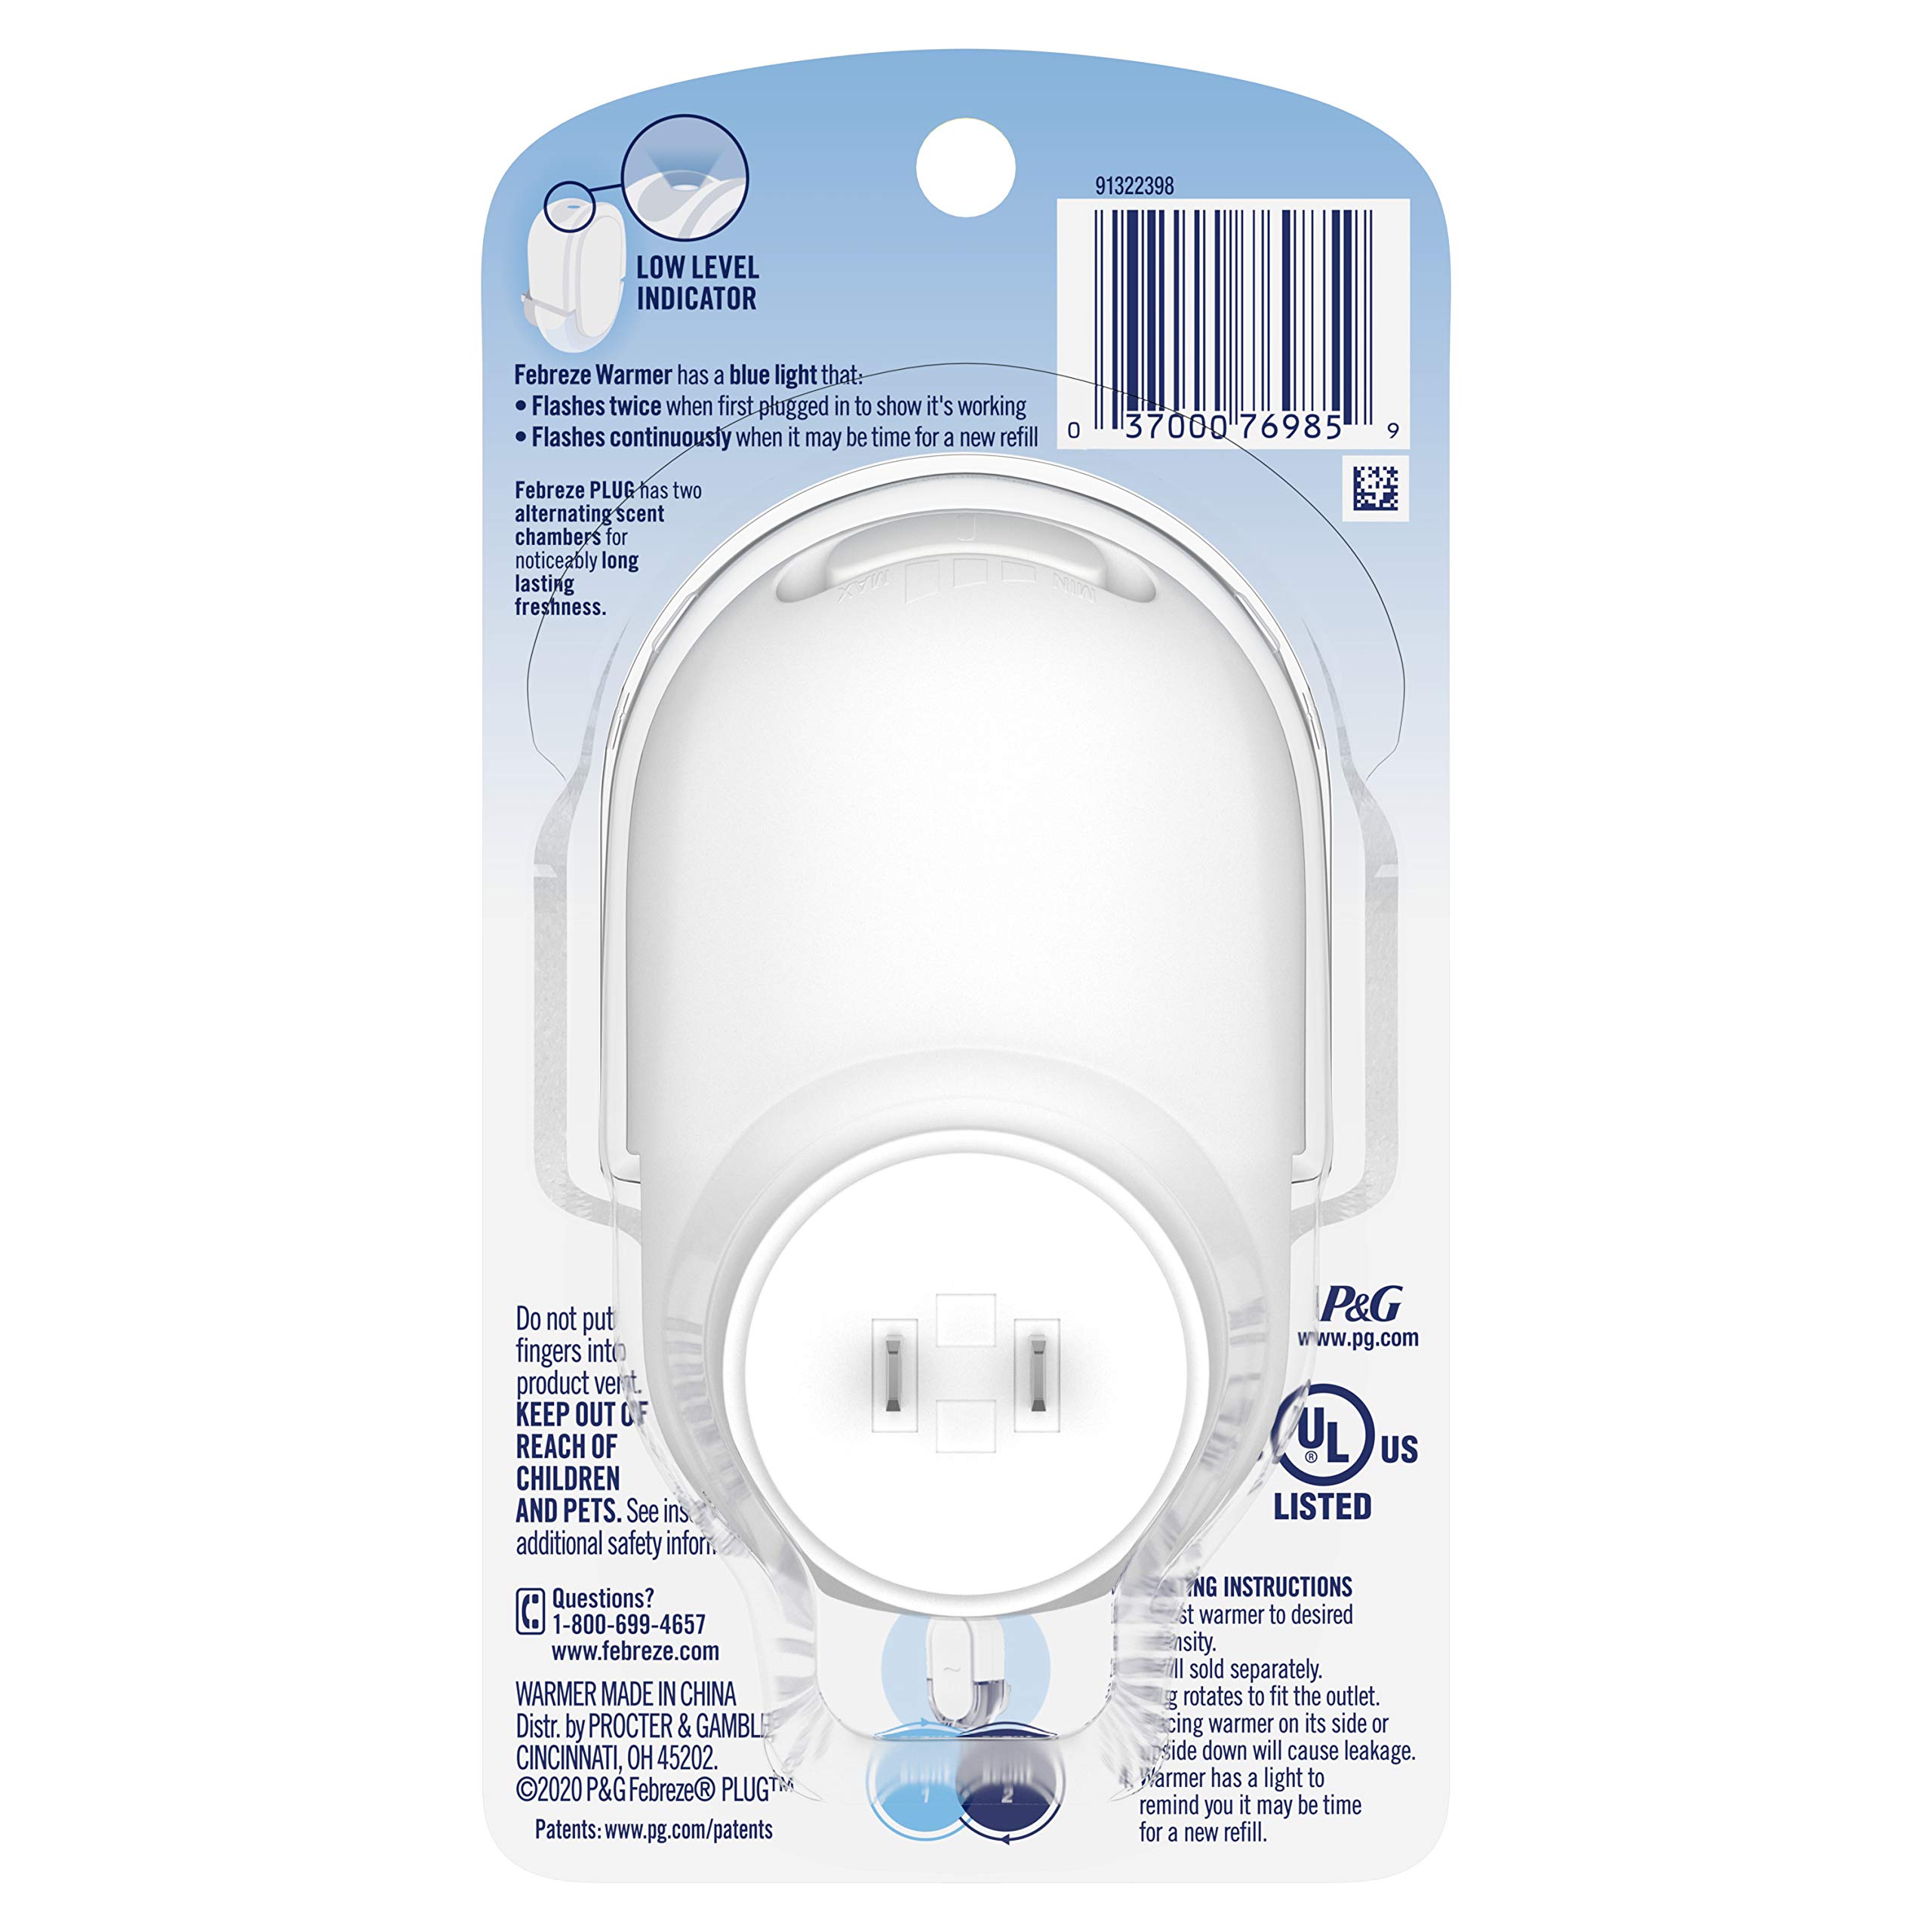 Febreze Plug In Air Freshener Fade Defy Plugs, Scented Oil Warmer, (Pack of 4)